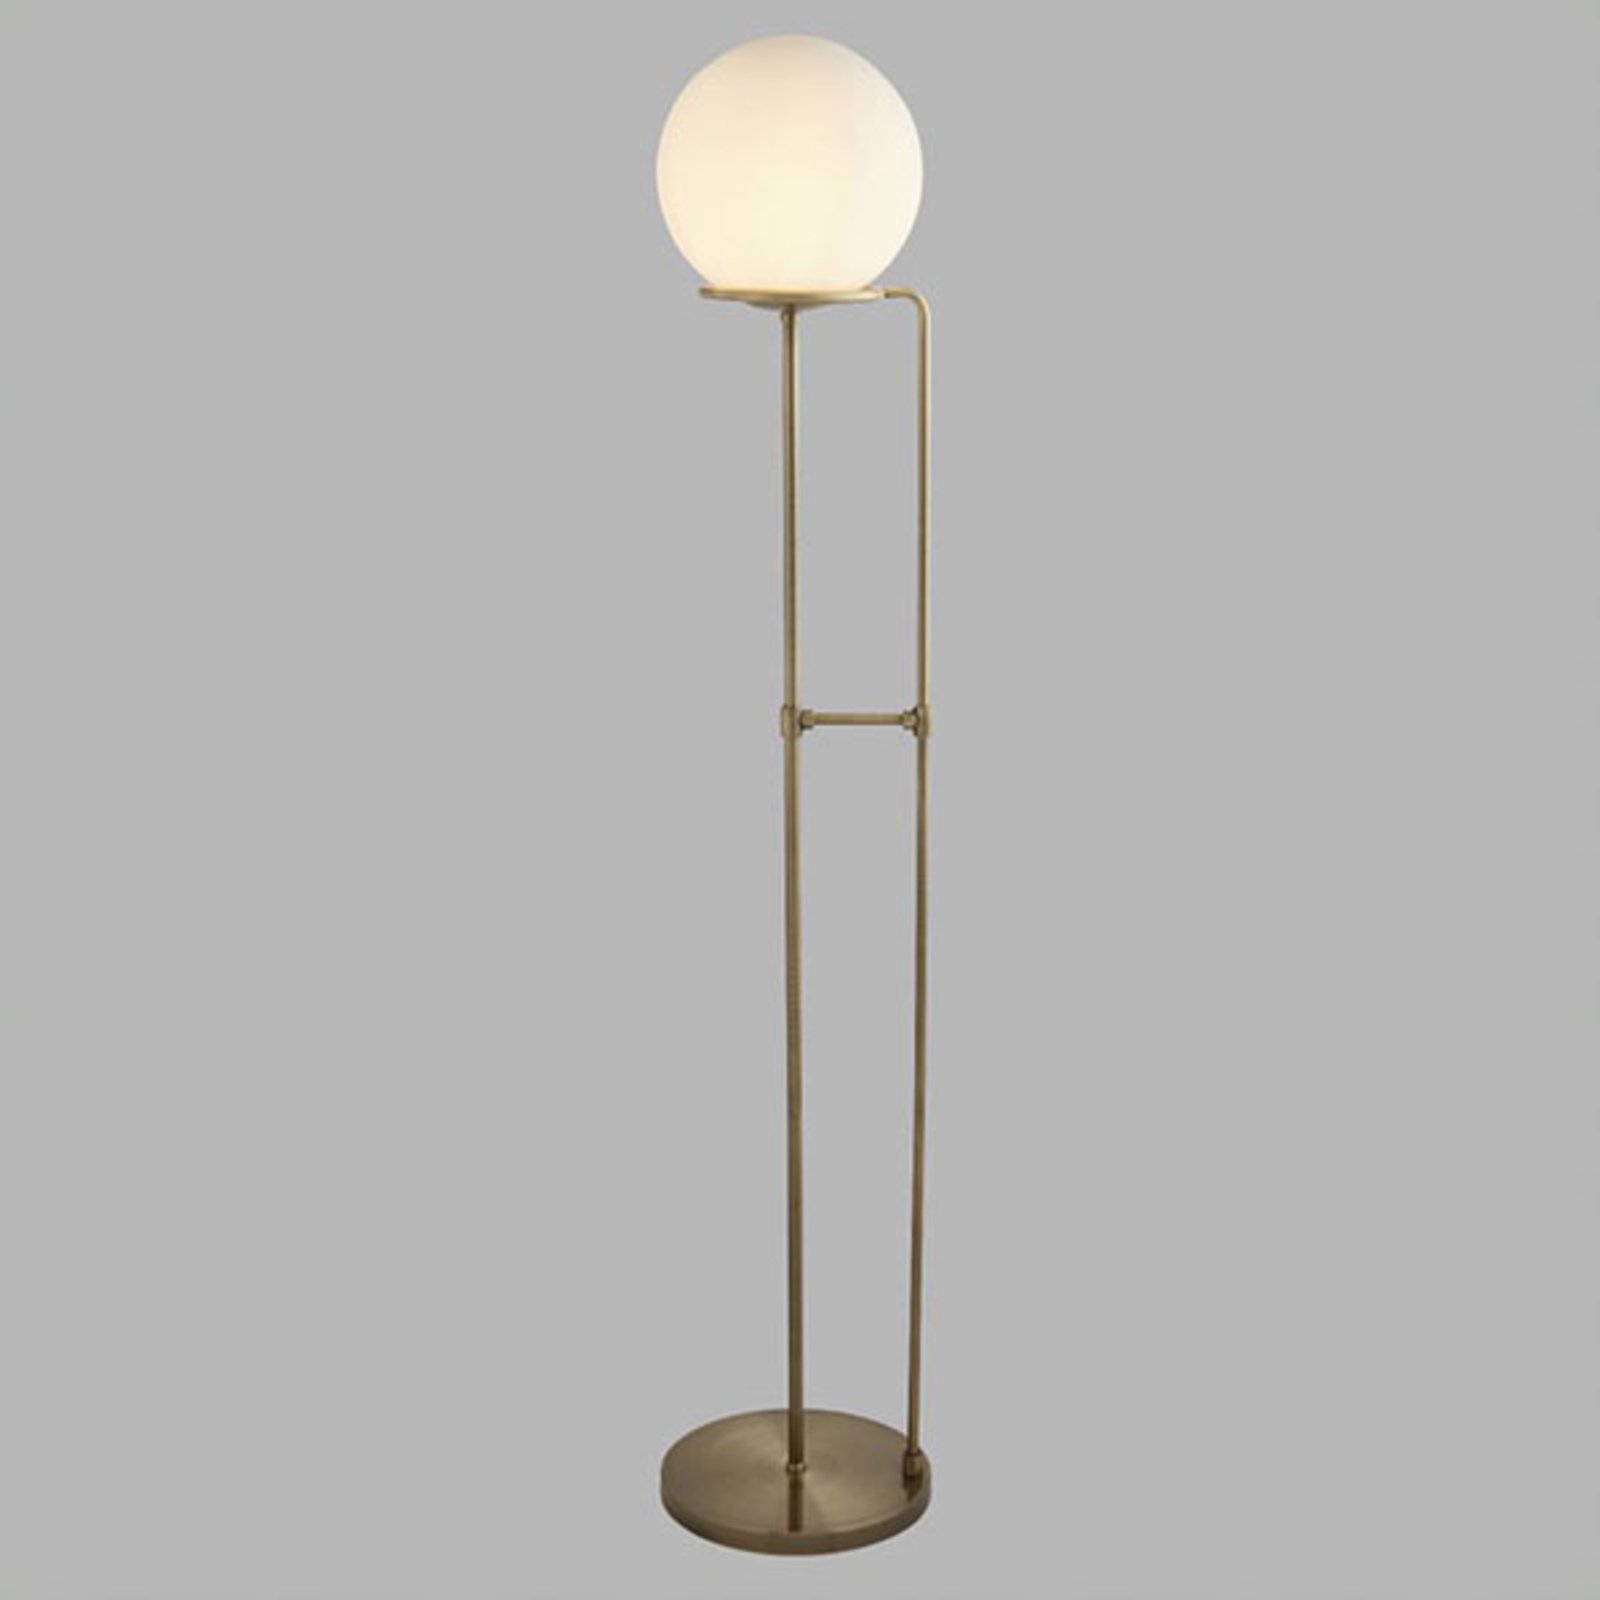 Sphere floor lamp in antique brass with glass ball